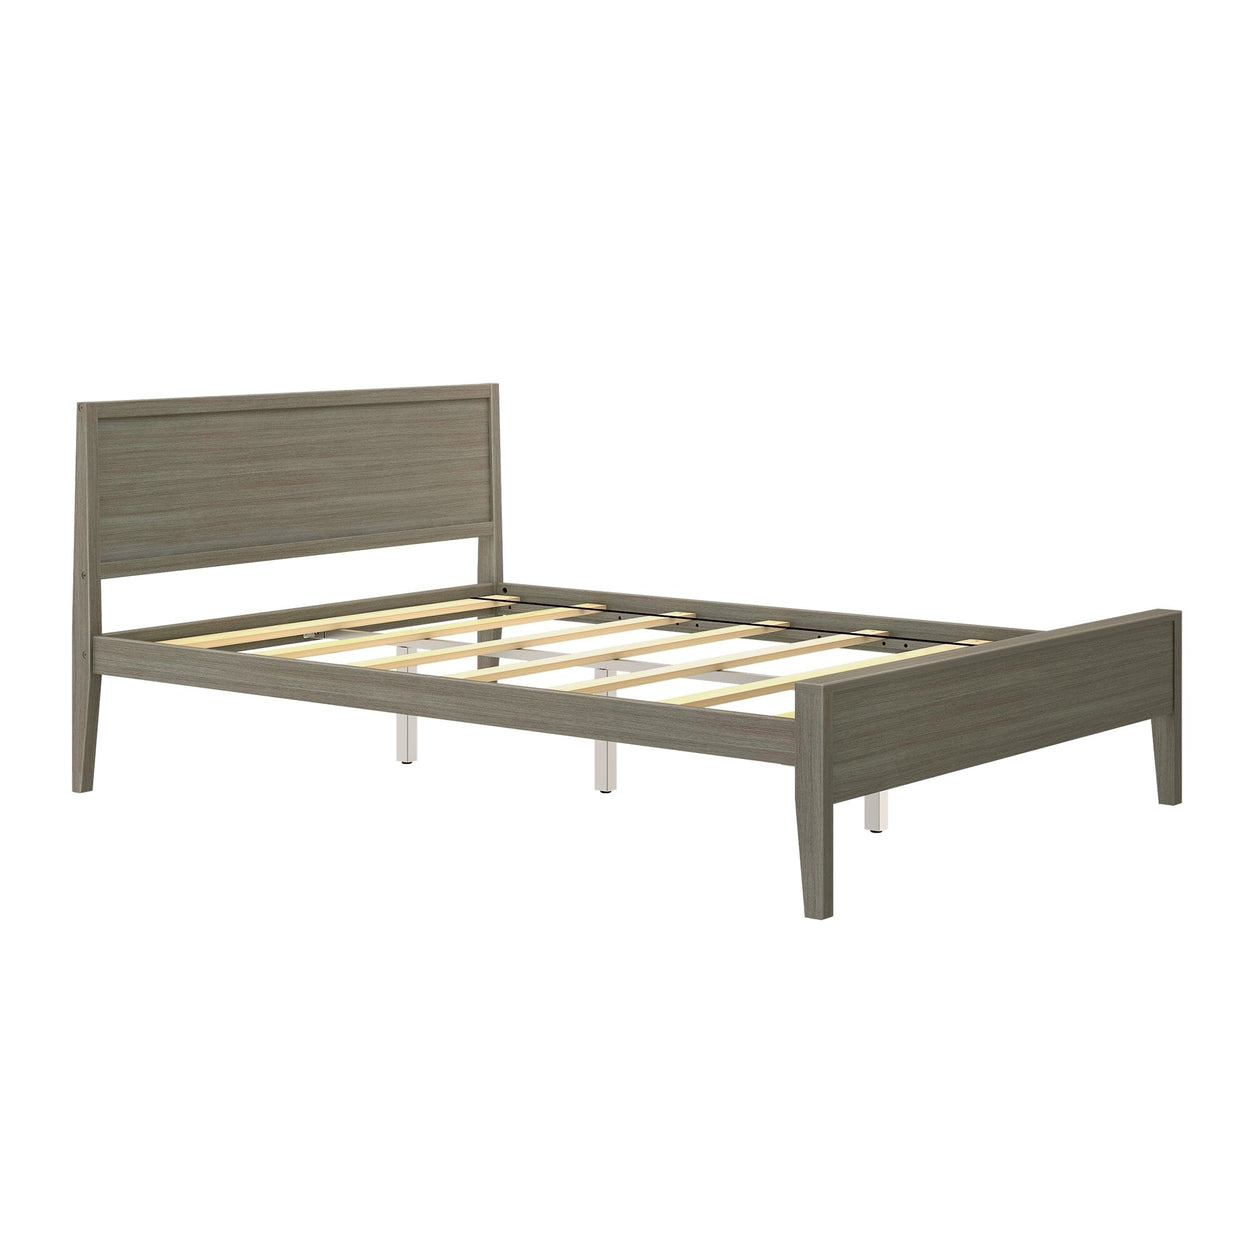 181102-151 : Kids Beds Classic Queen-Size Bed with Panel Headboard, Clay